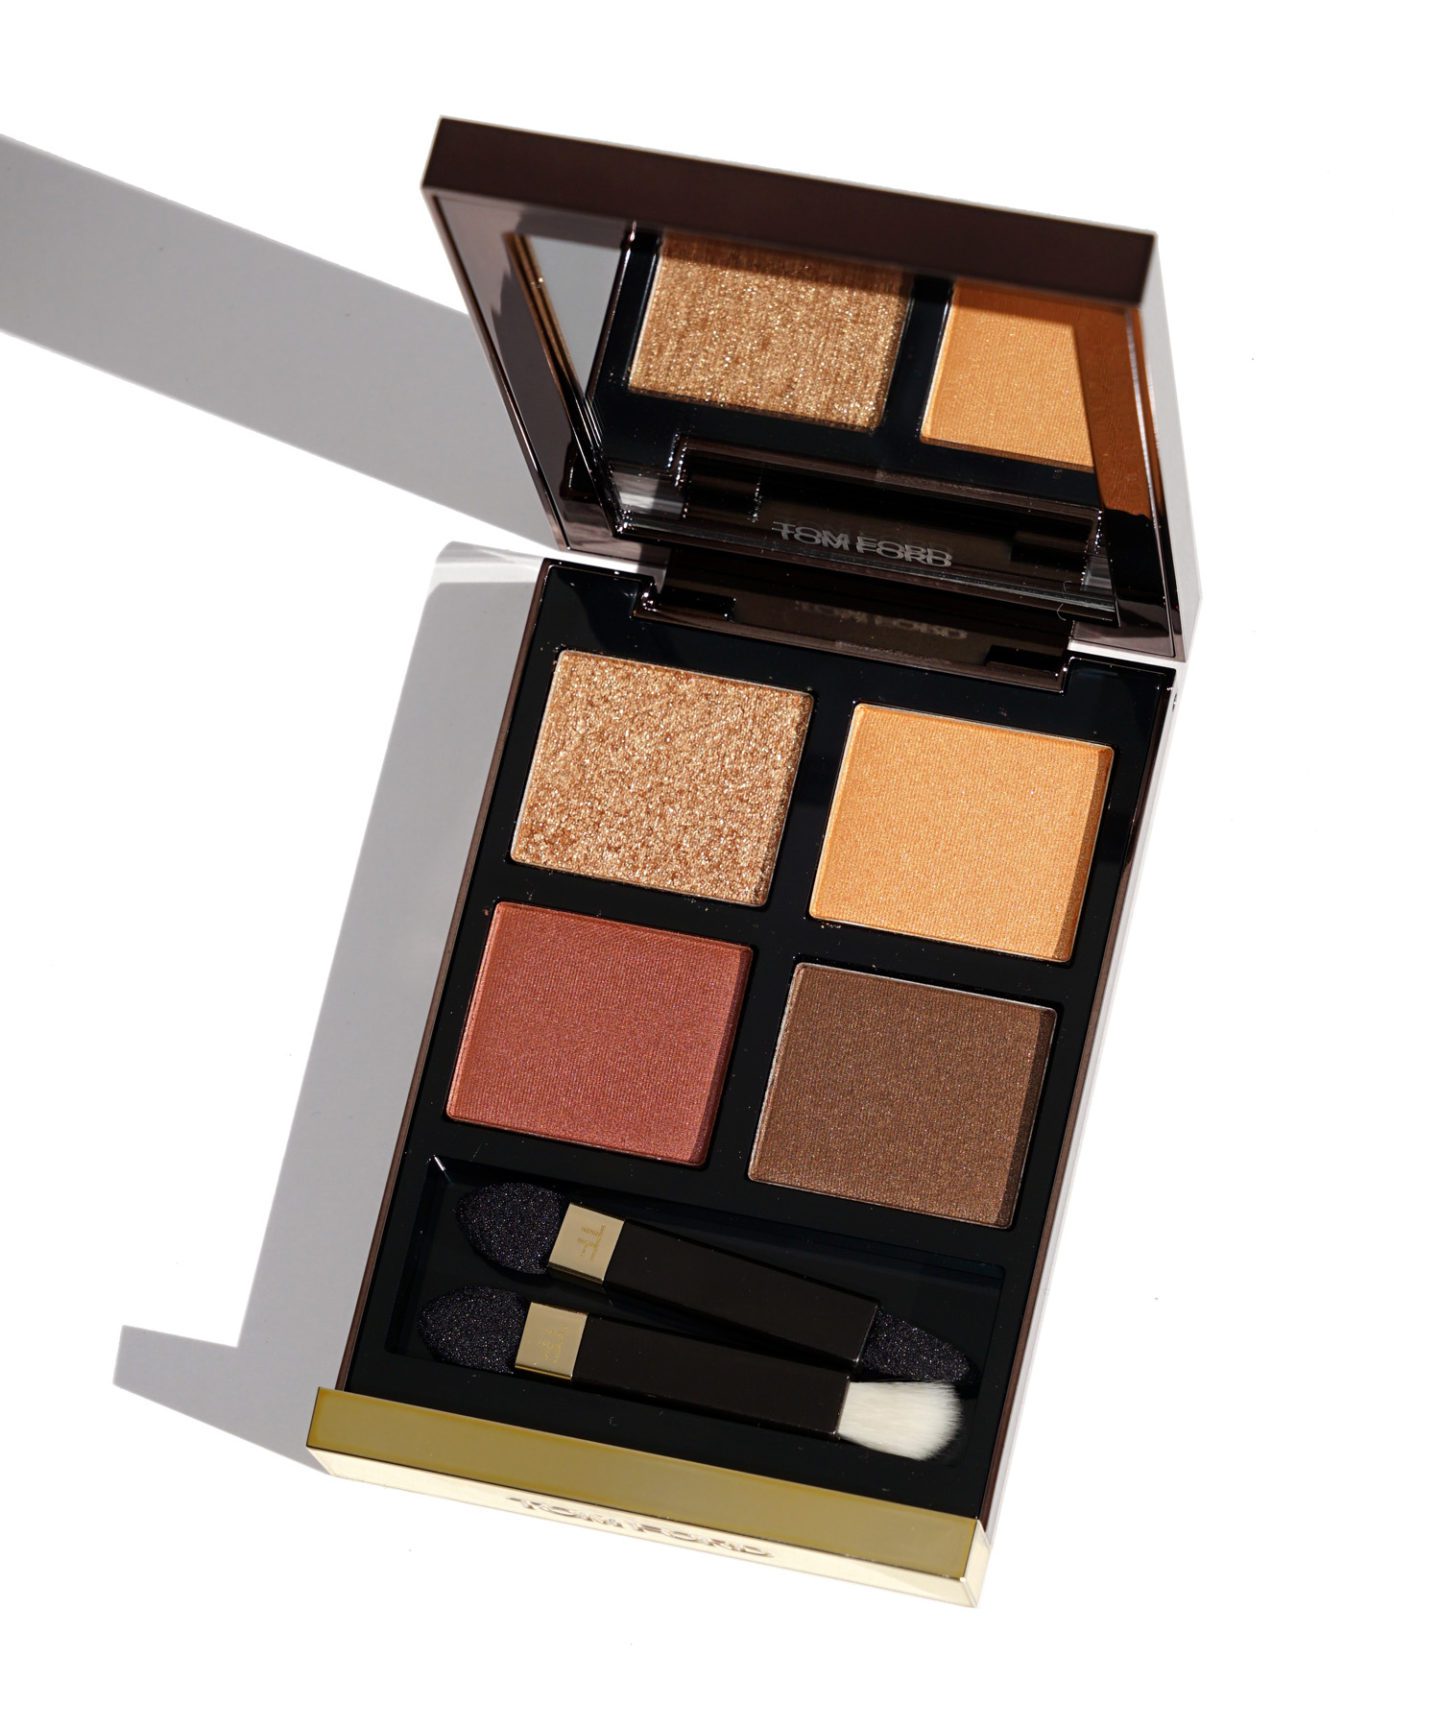 Tom Ford Leopard Sun Eyeshadow Quad Review | The Beauty Look Book